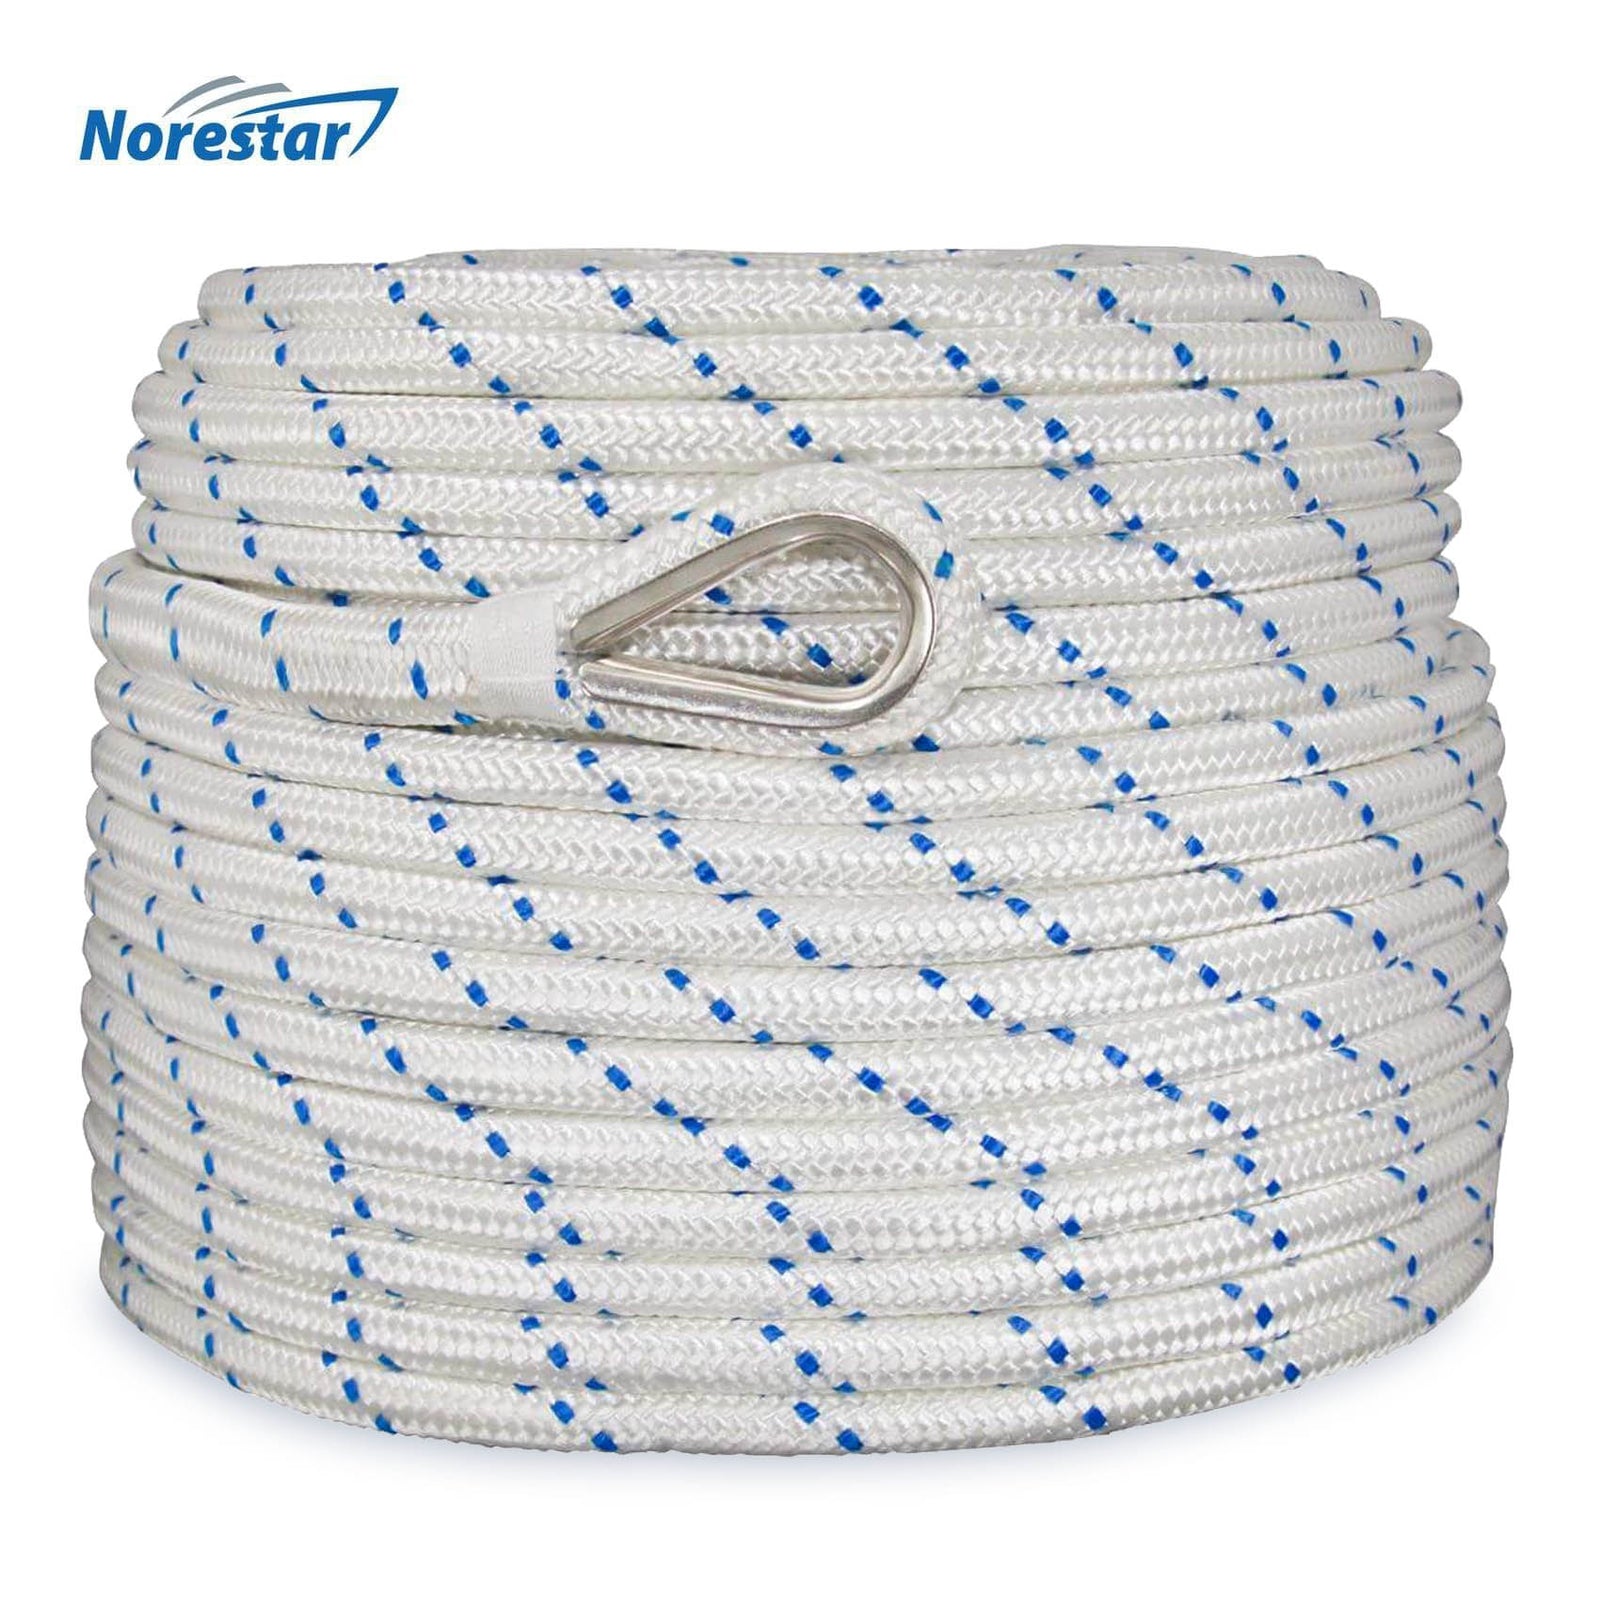 Norestar Double-Braided Nylon Anchor Rope with Stainless Steel Thimble –